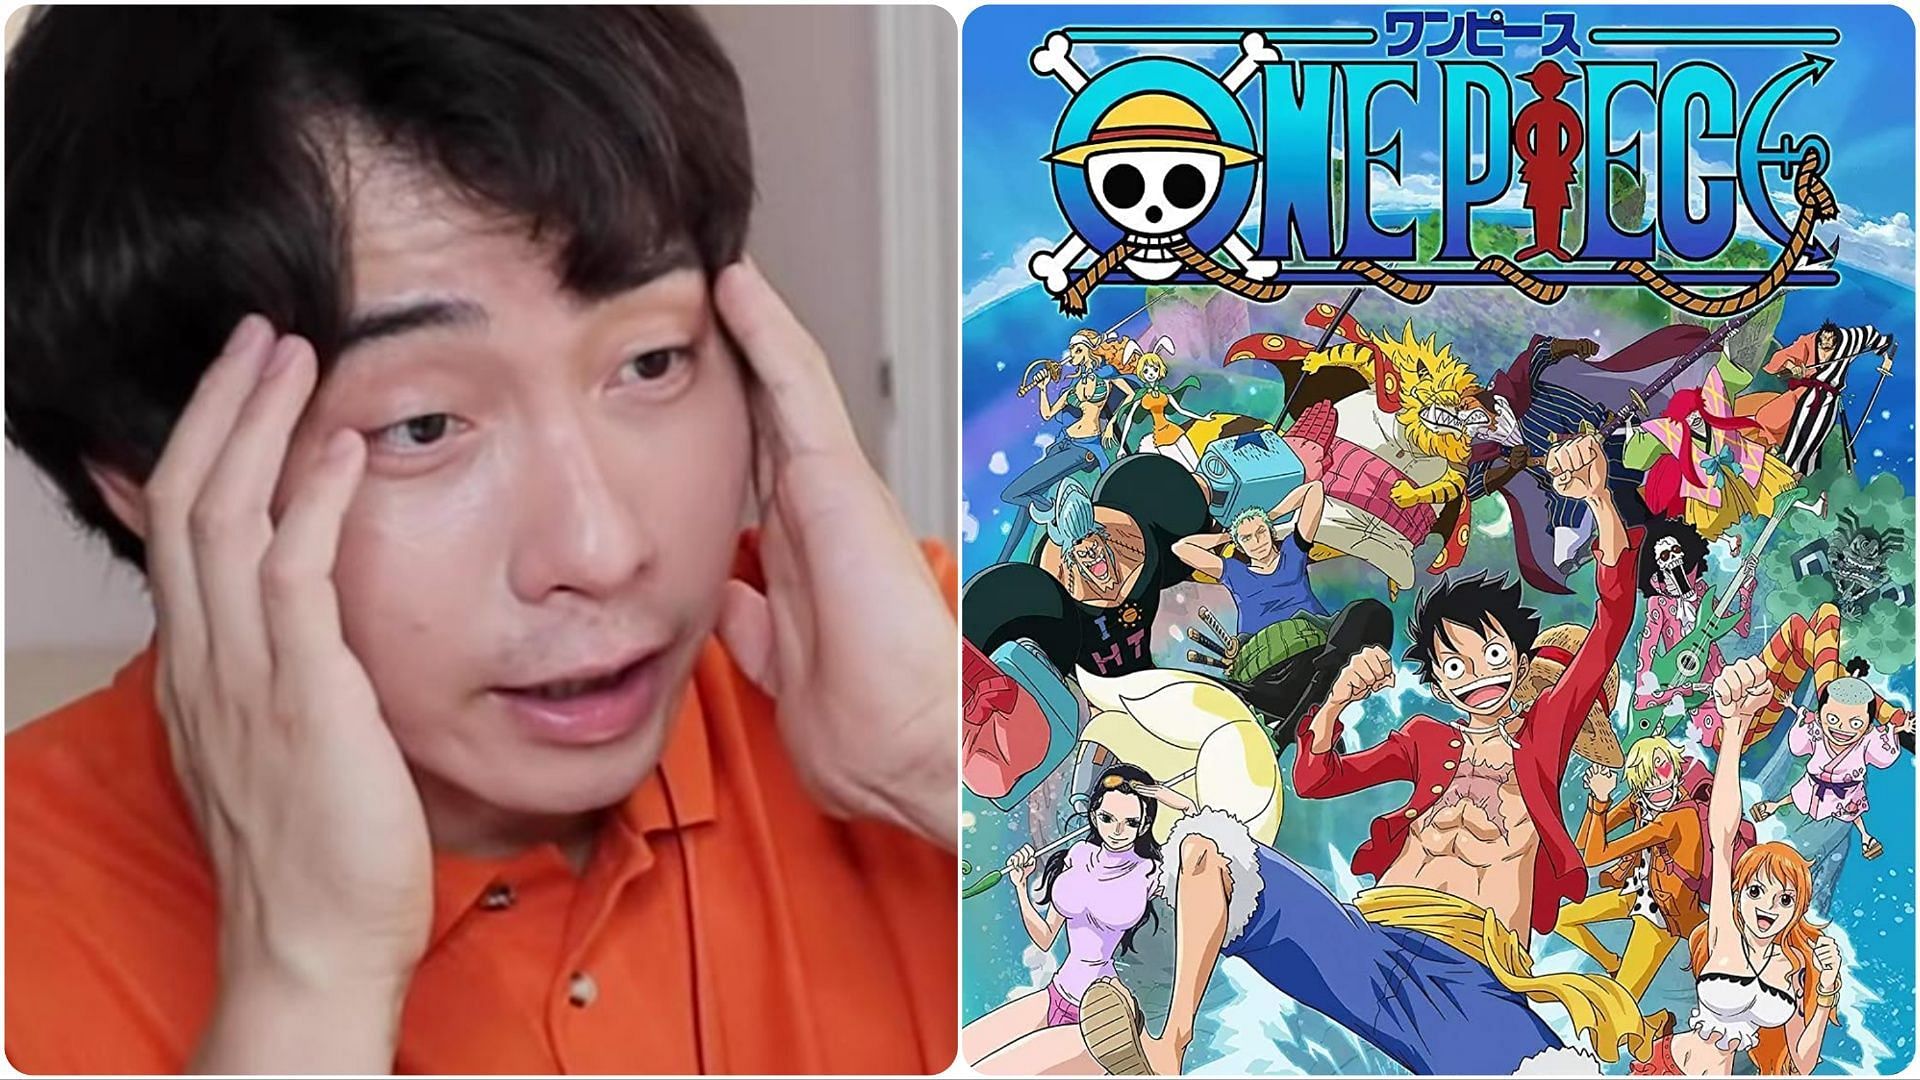 Toei Animation copyright strike Uncle Roger over One Piece anime infringement (Image via Daily Mail/ Nigel Ng Kin-ju/ Toei Animation)